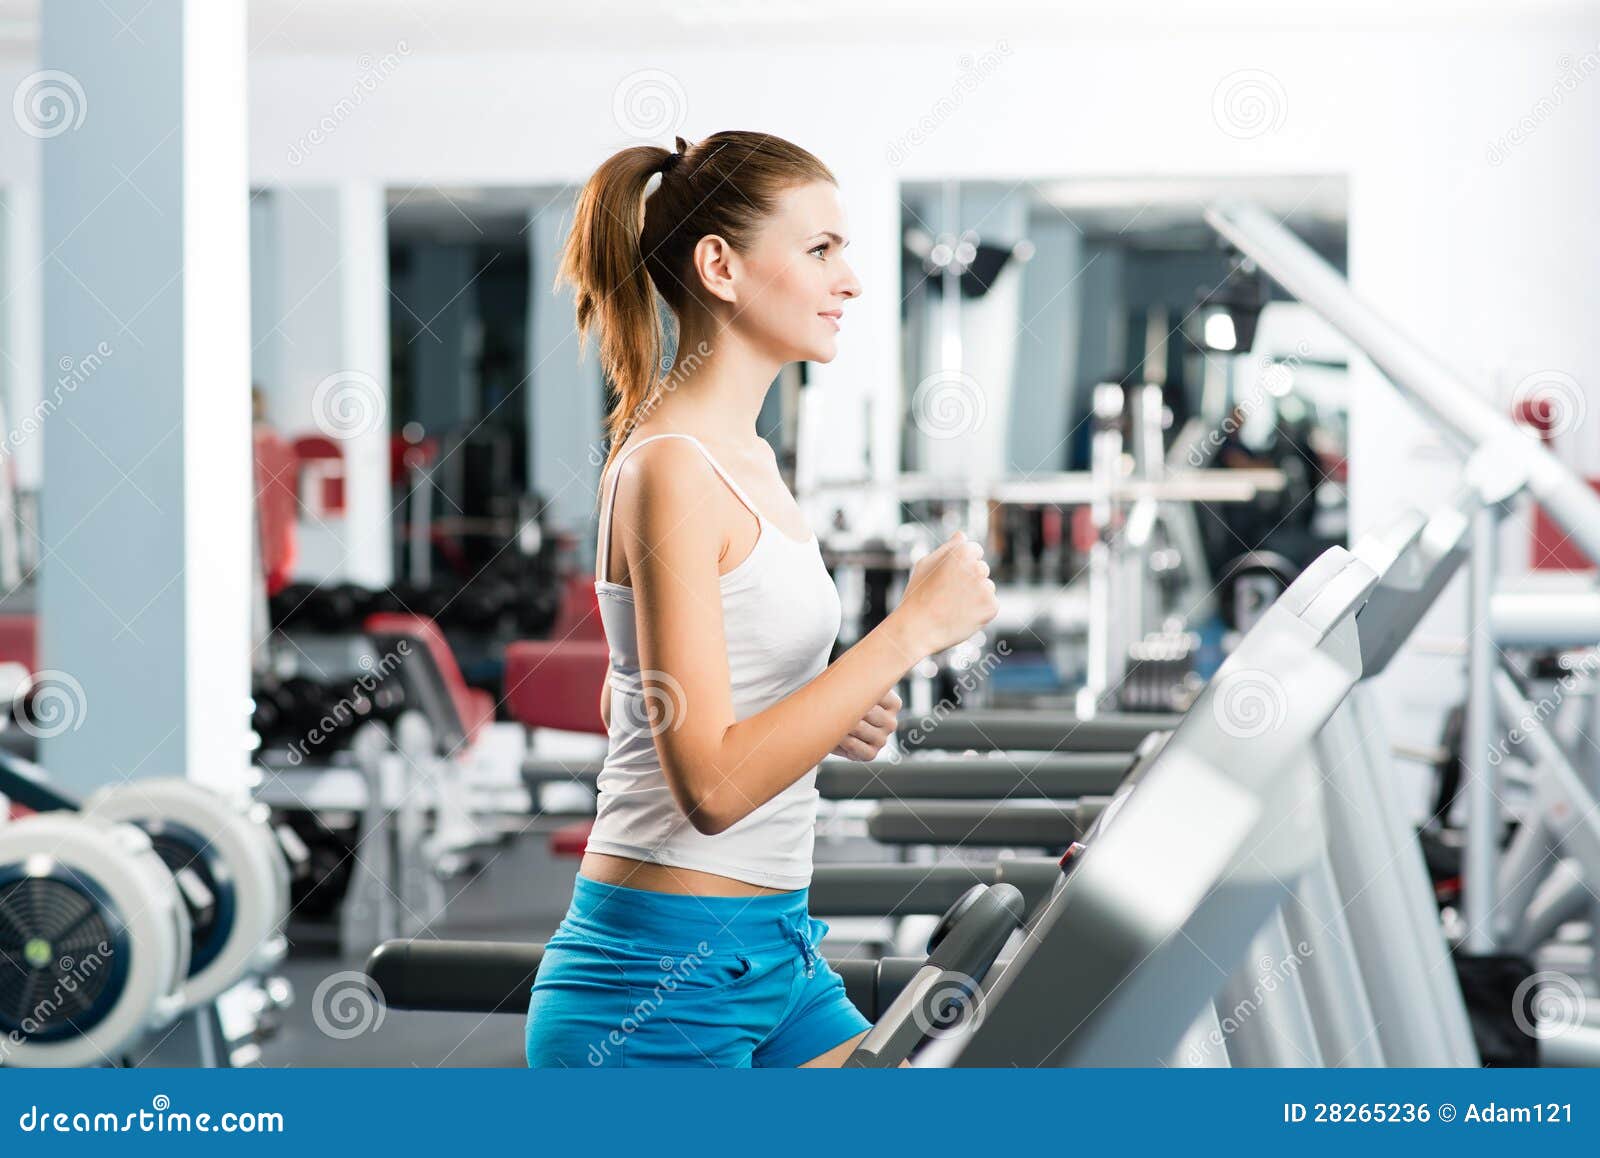 Attractive Young Woman Runs on a Treadmill Stock Photo - Image of ...